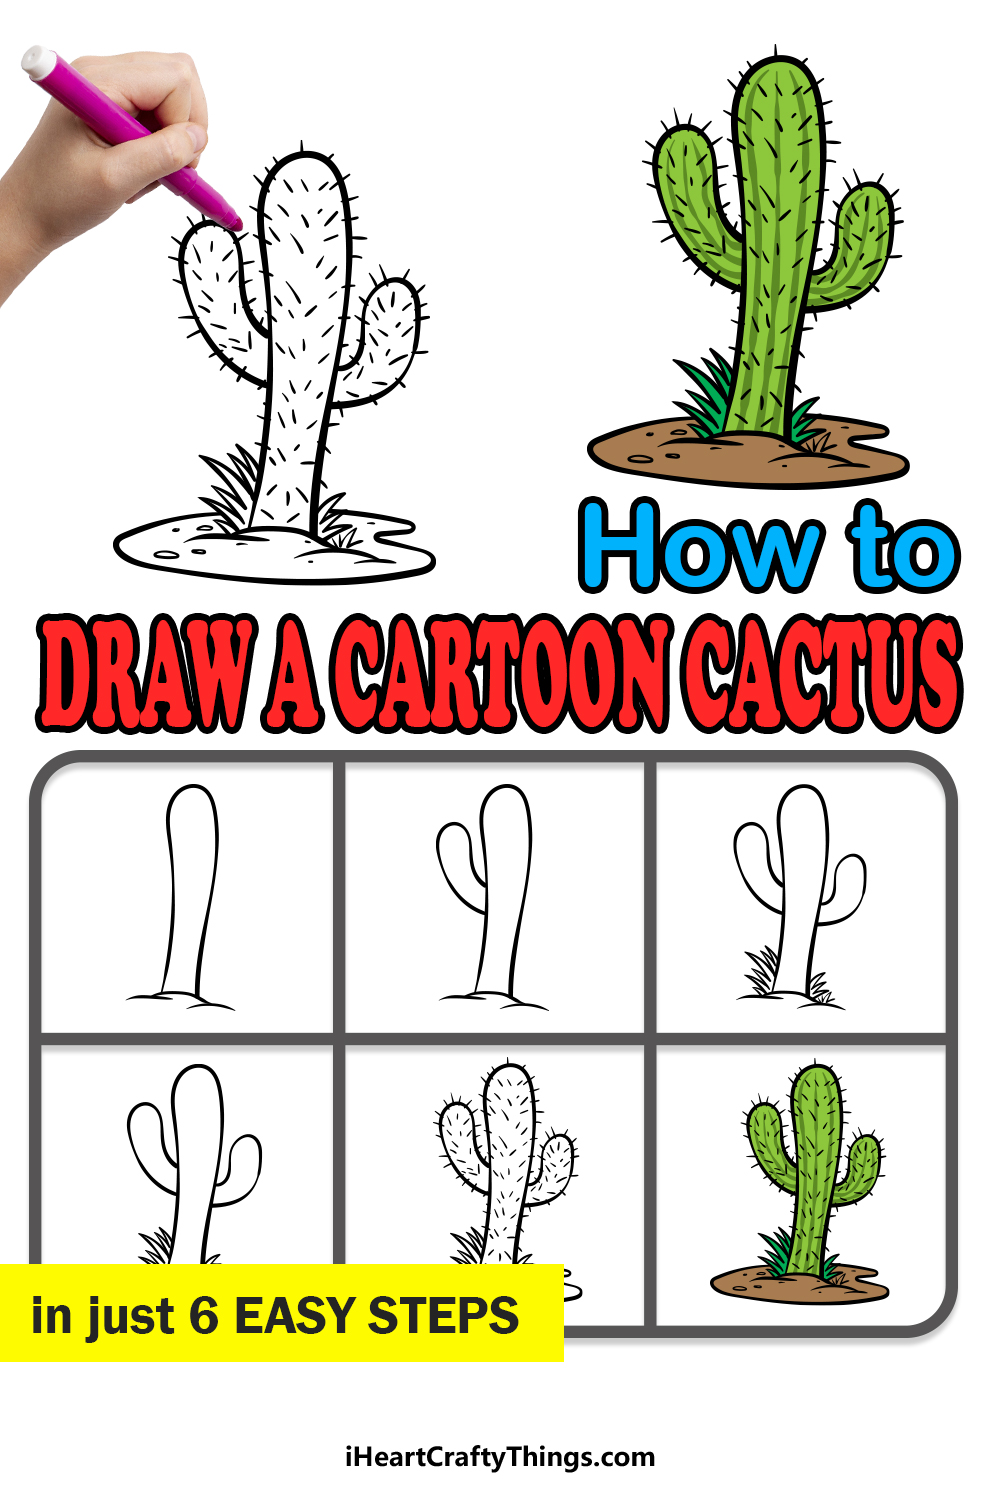 how to draw a cartoon cactus in 6 easy steps